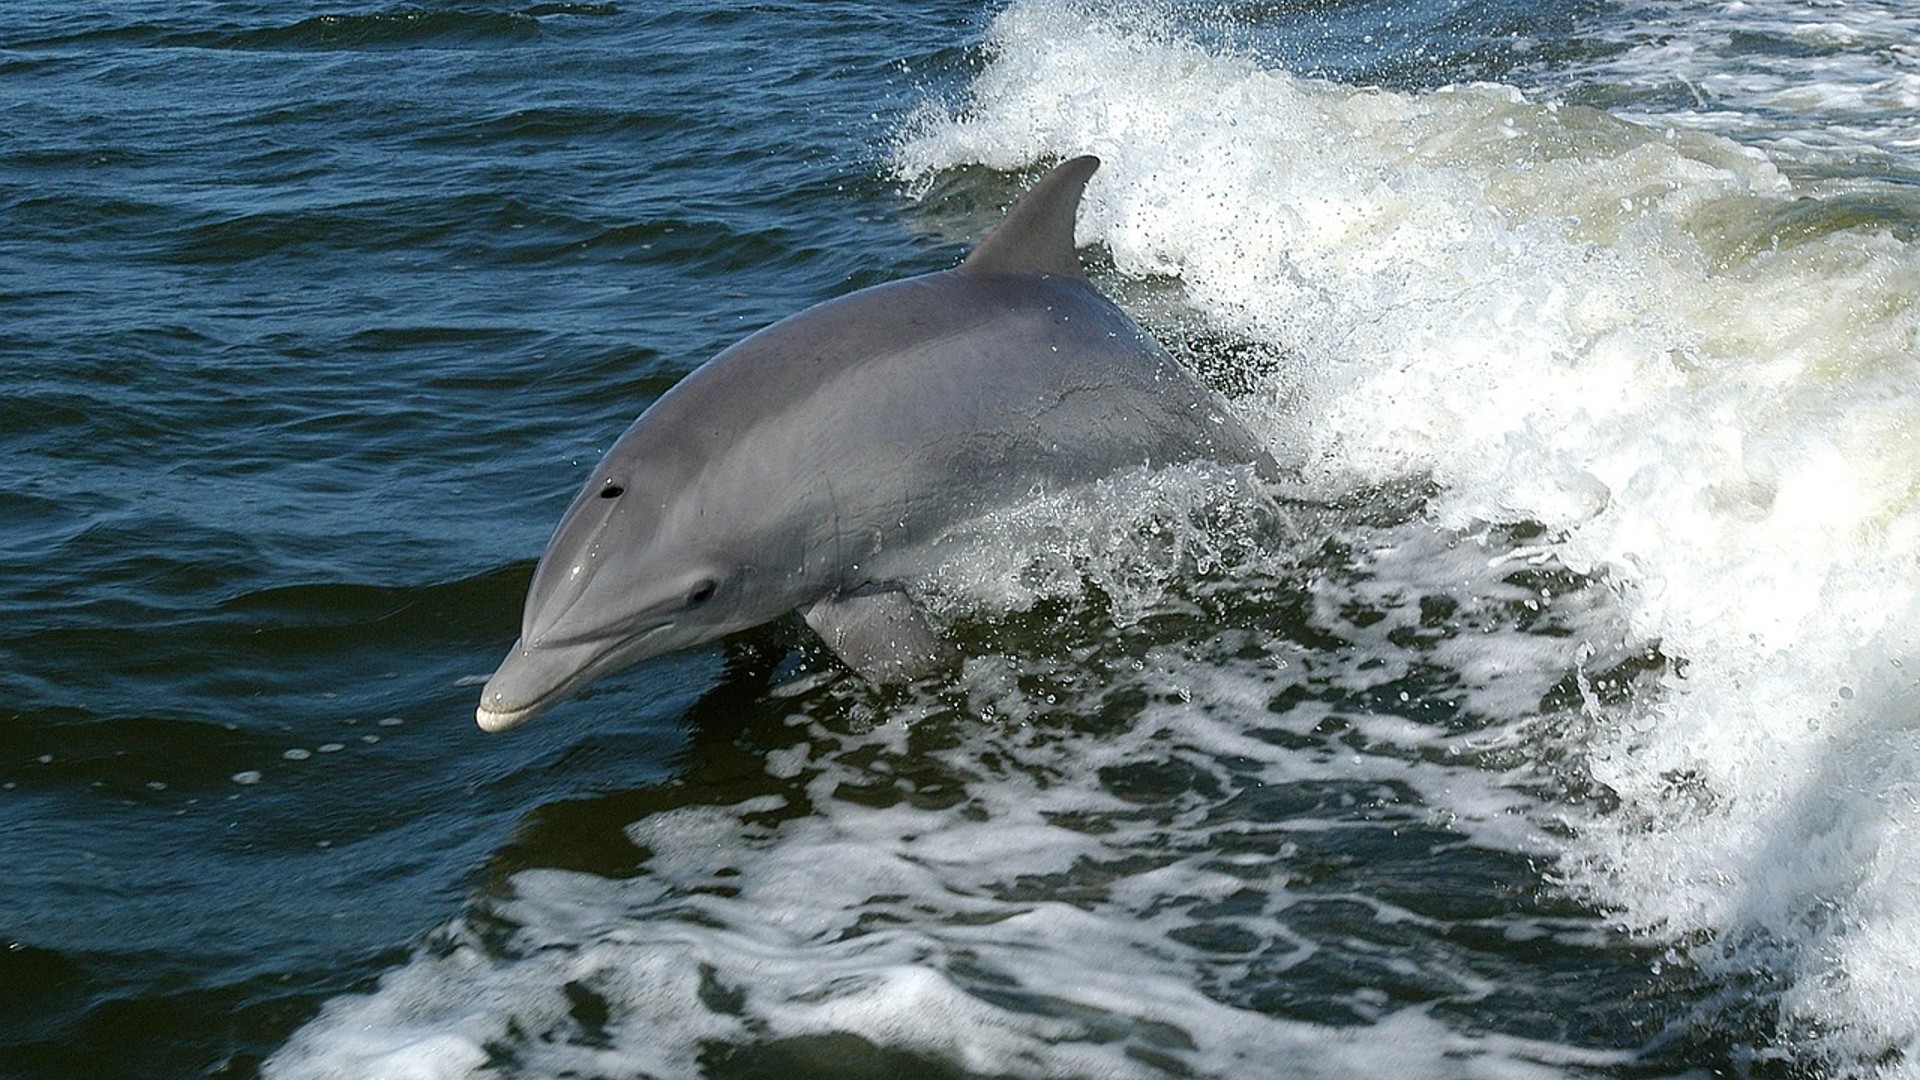 A bottlenose dolphin swimming in the sea